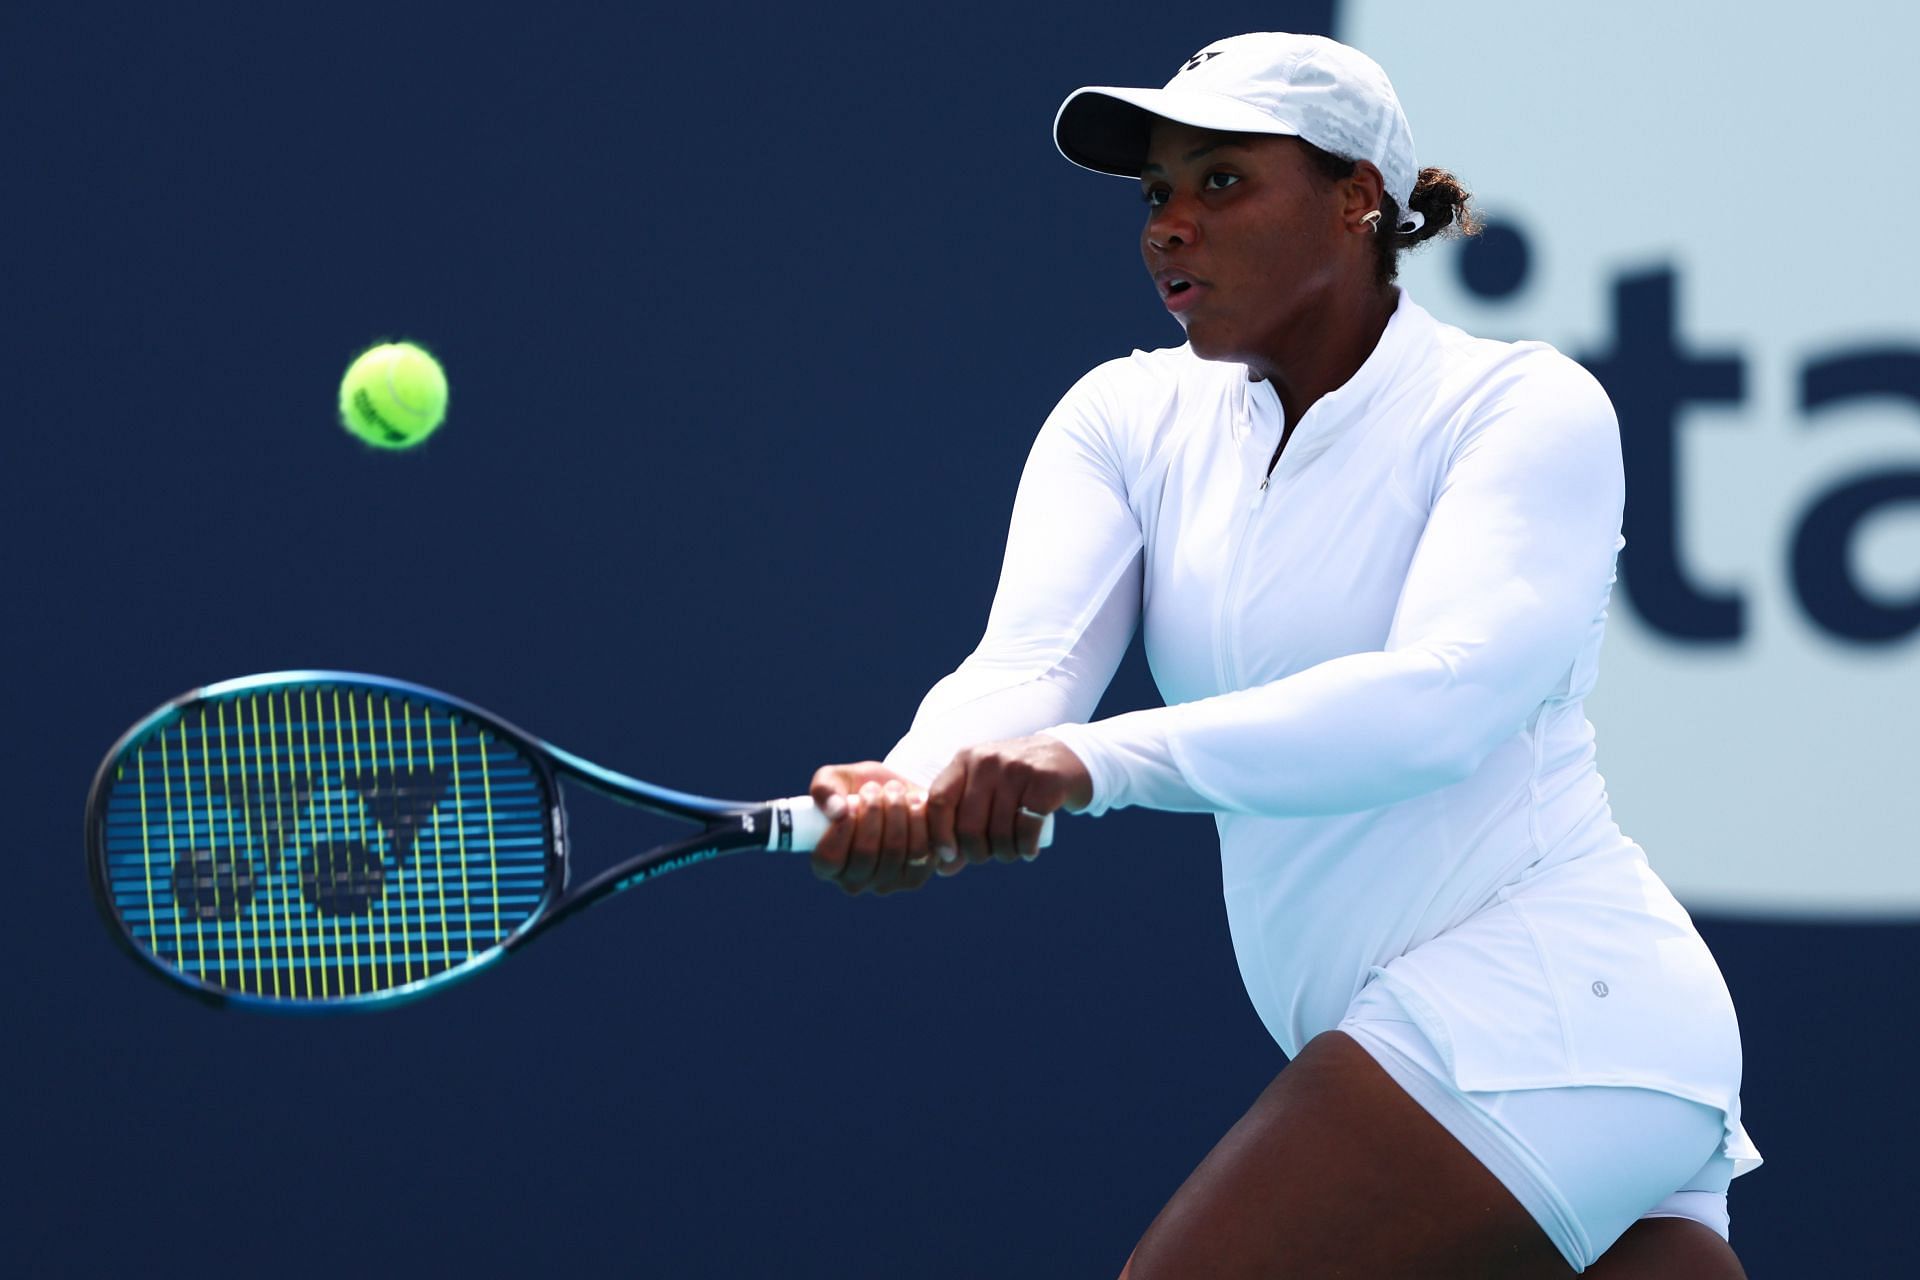 Taylor Townsend at the Miami Open